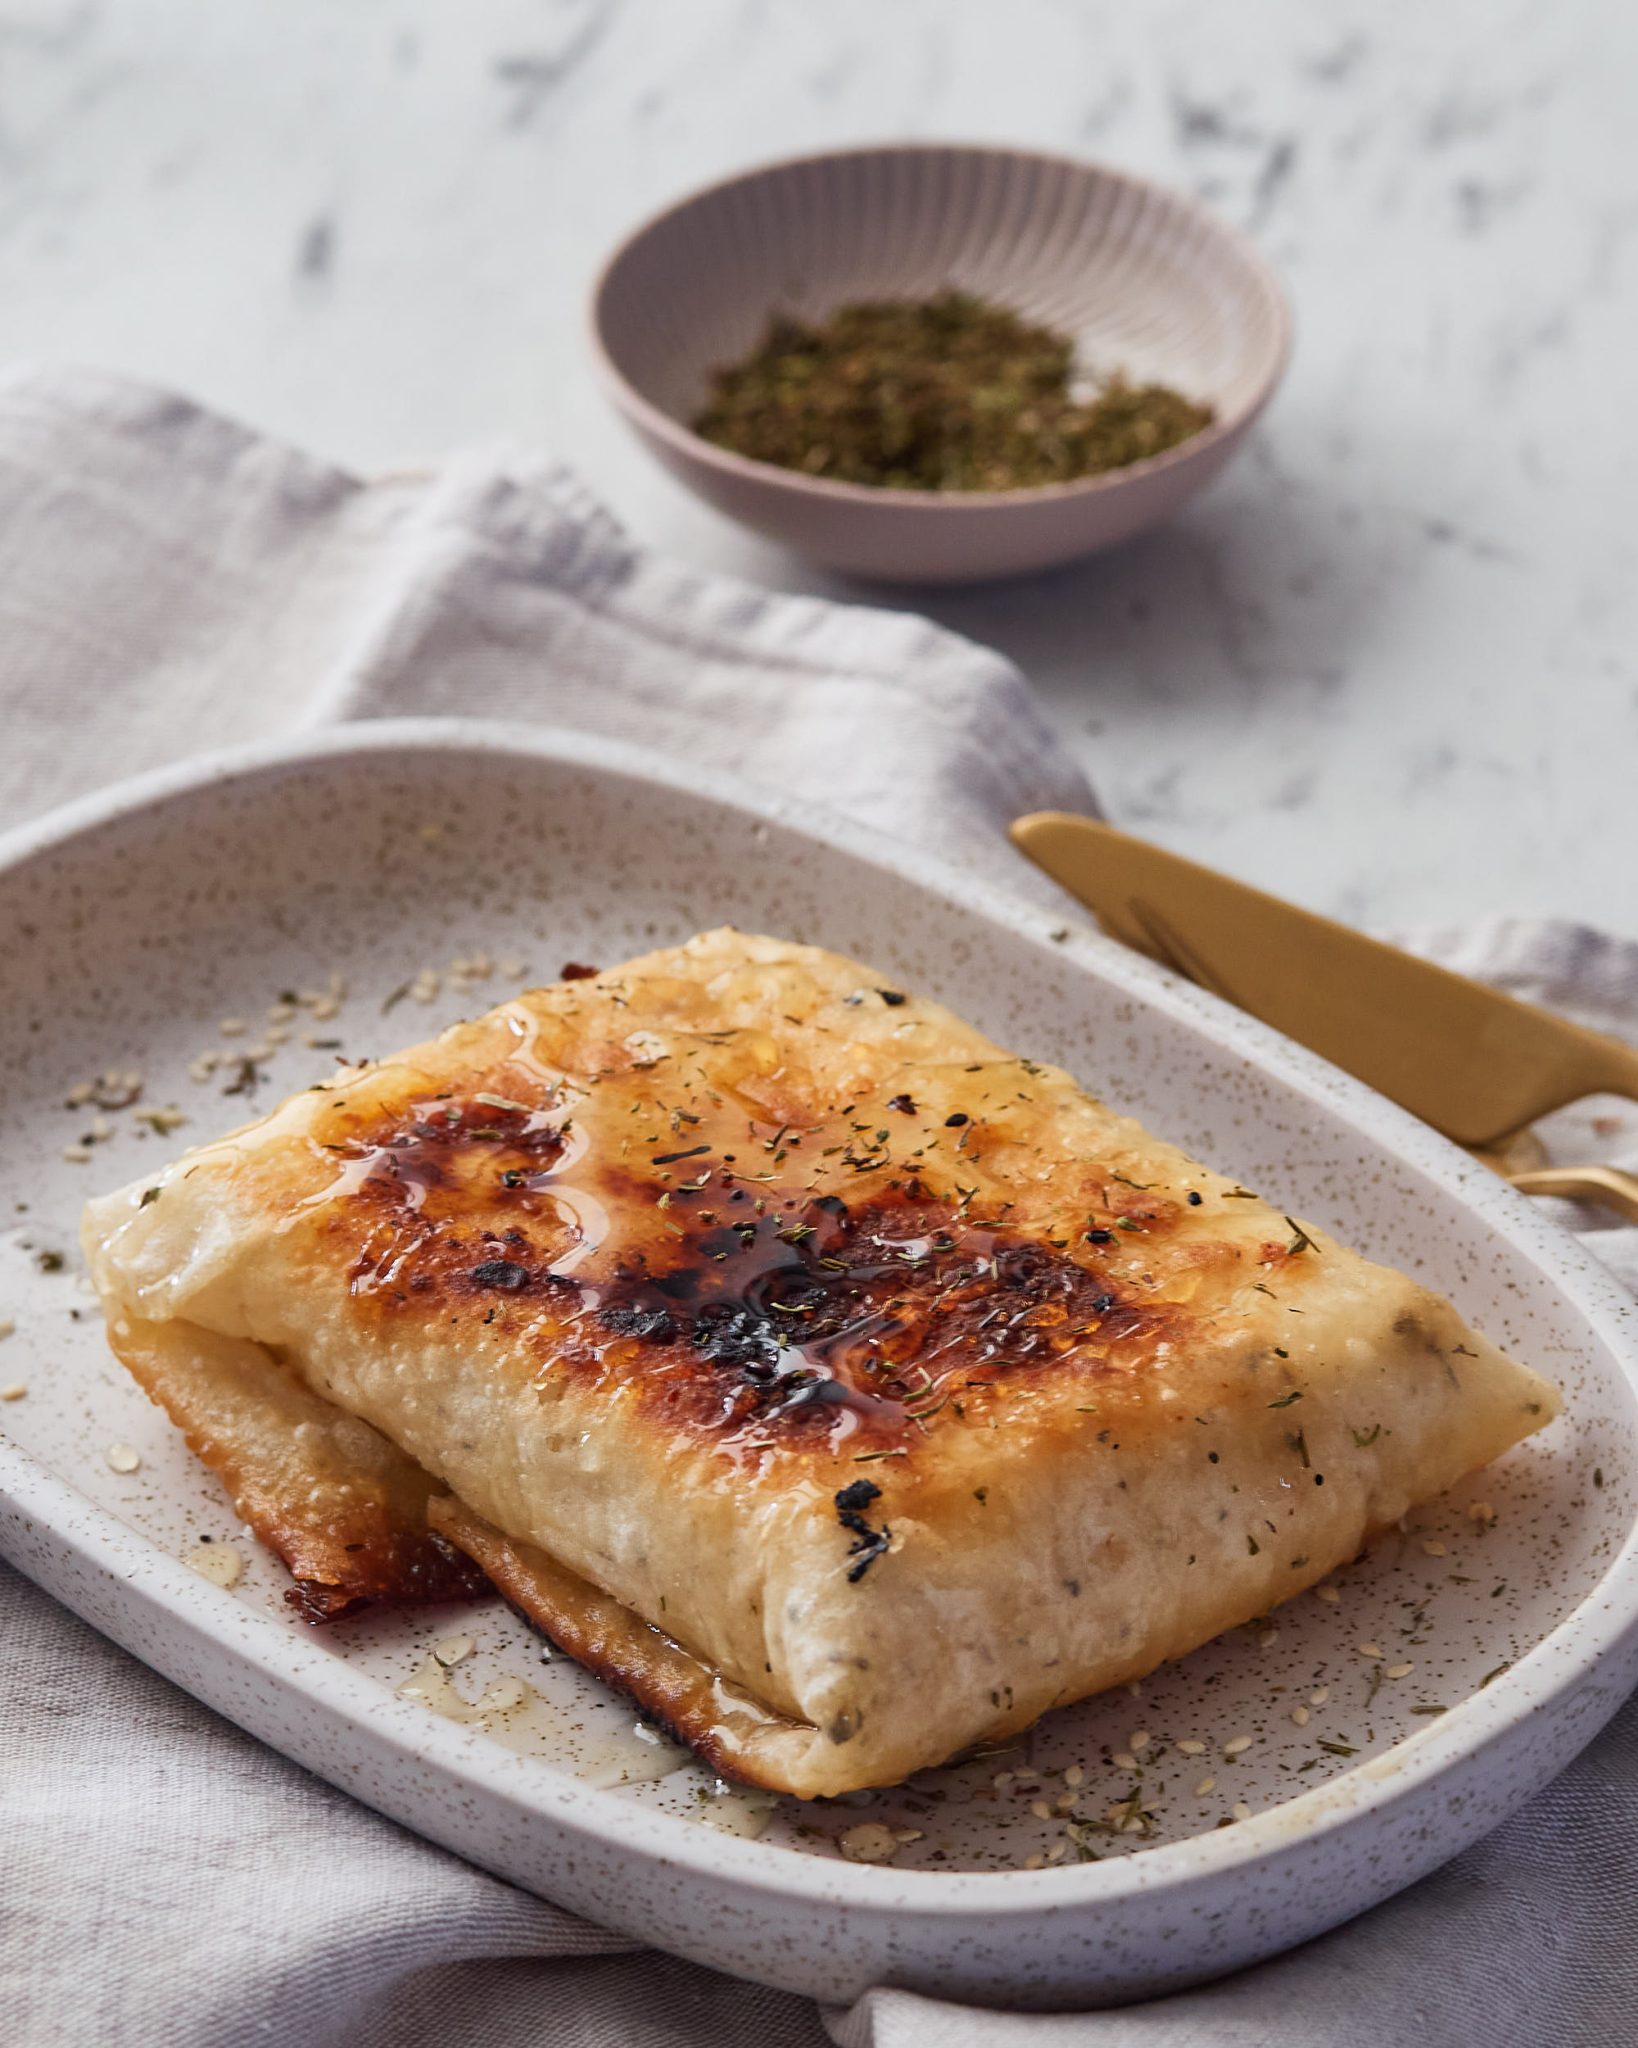 Feta-wrapped puff pastry recipe